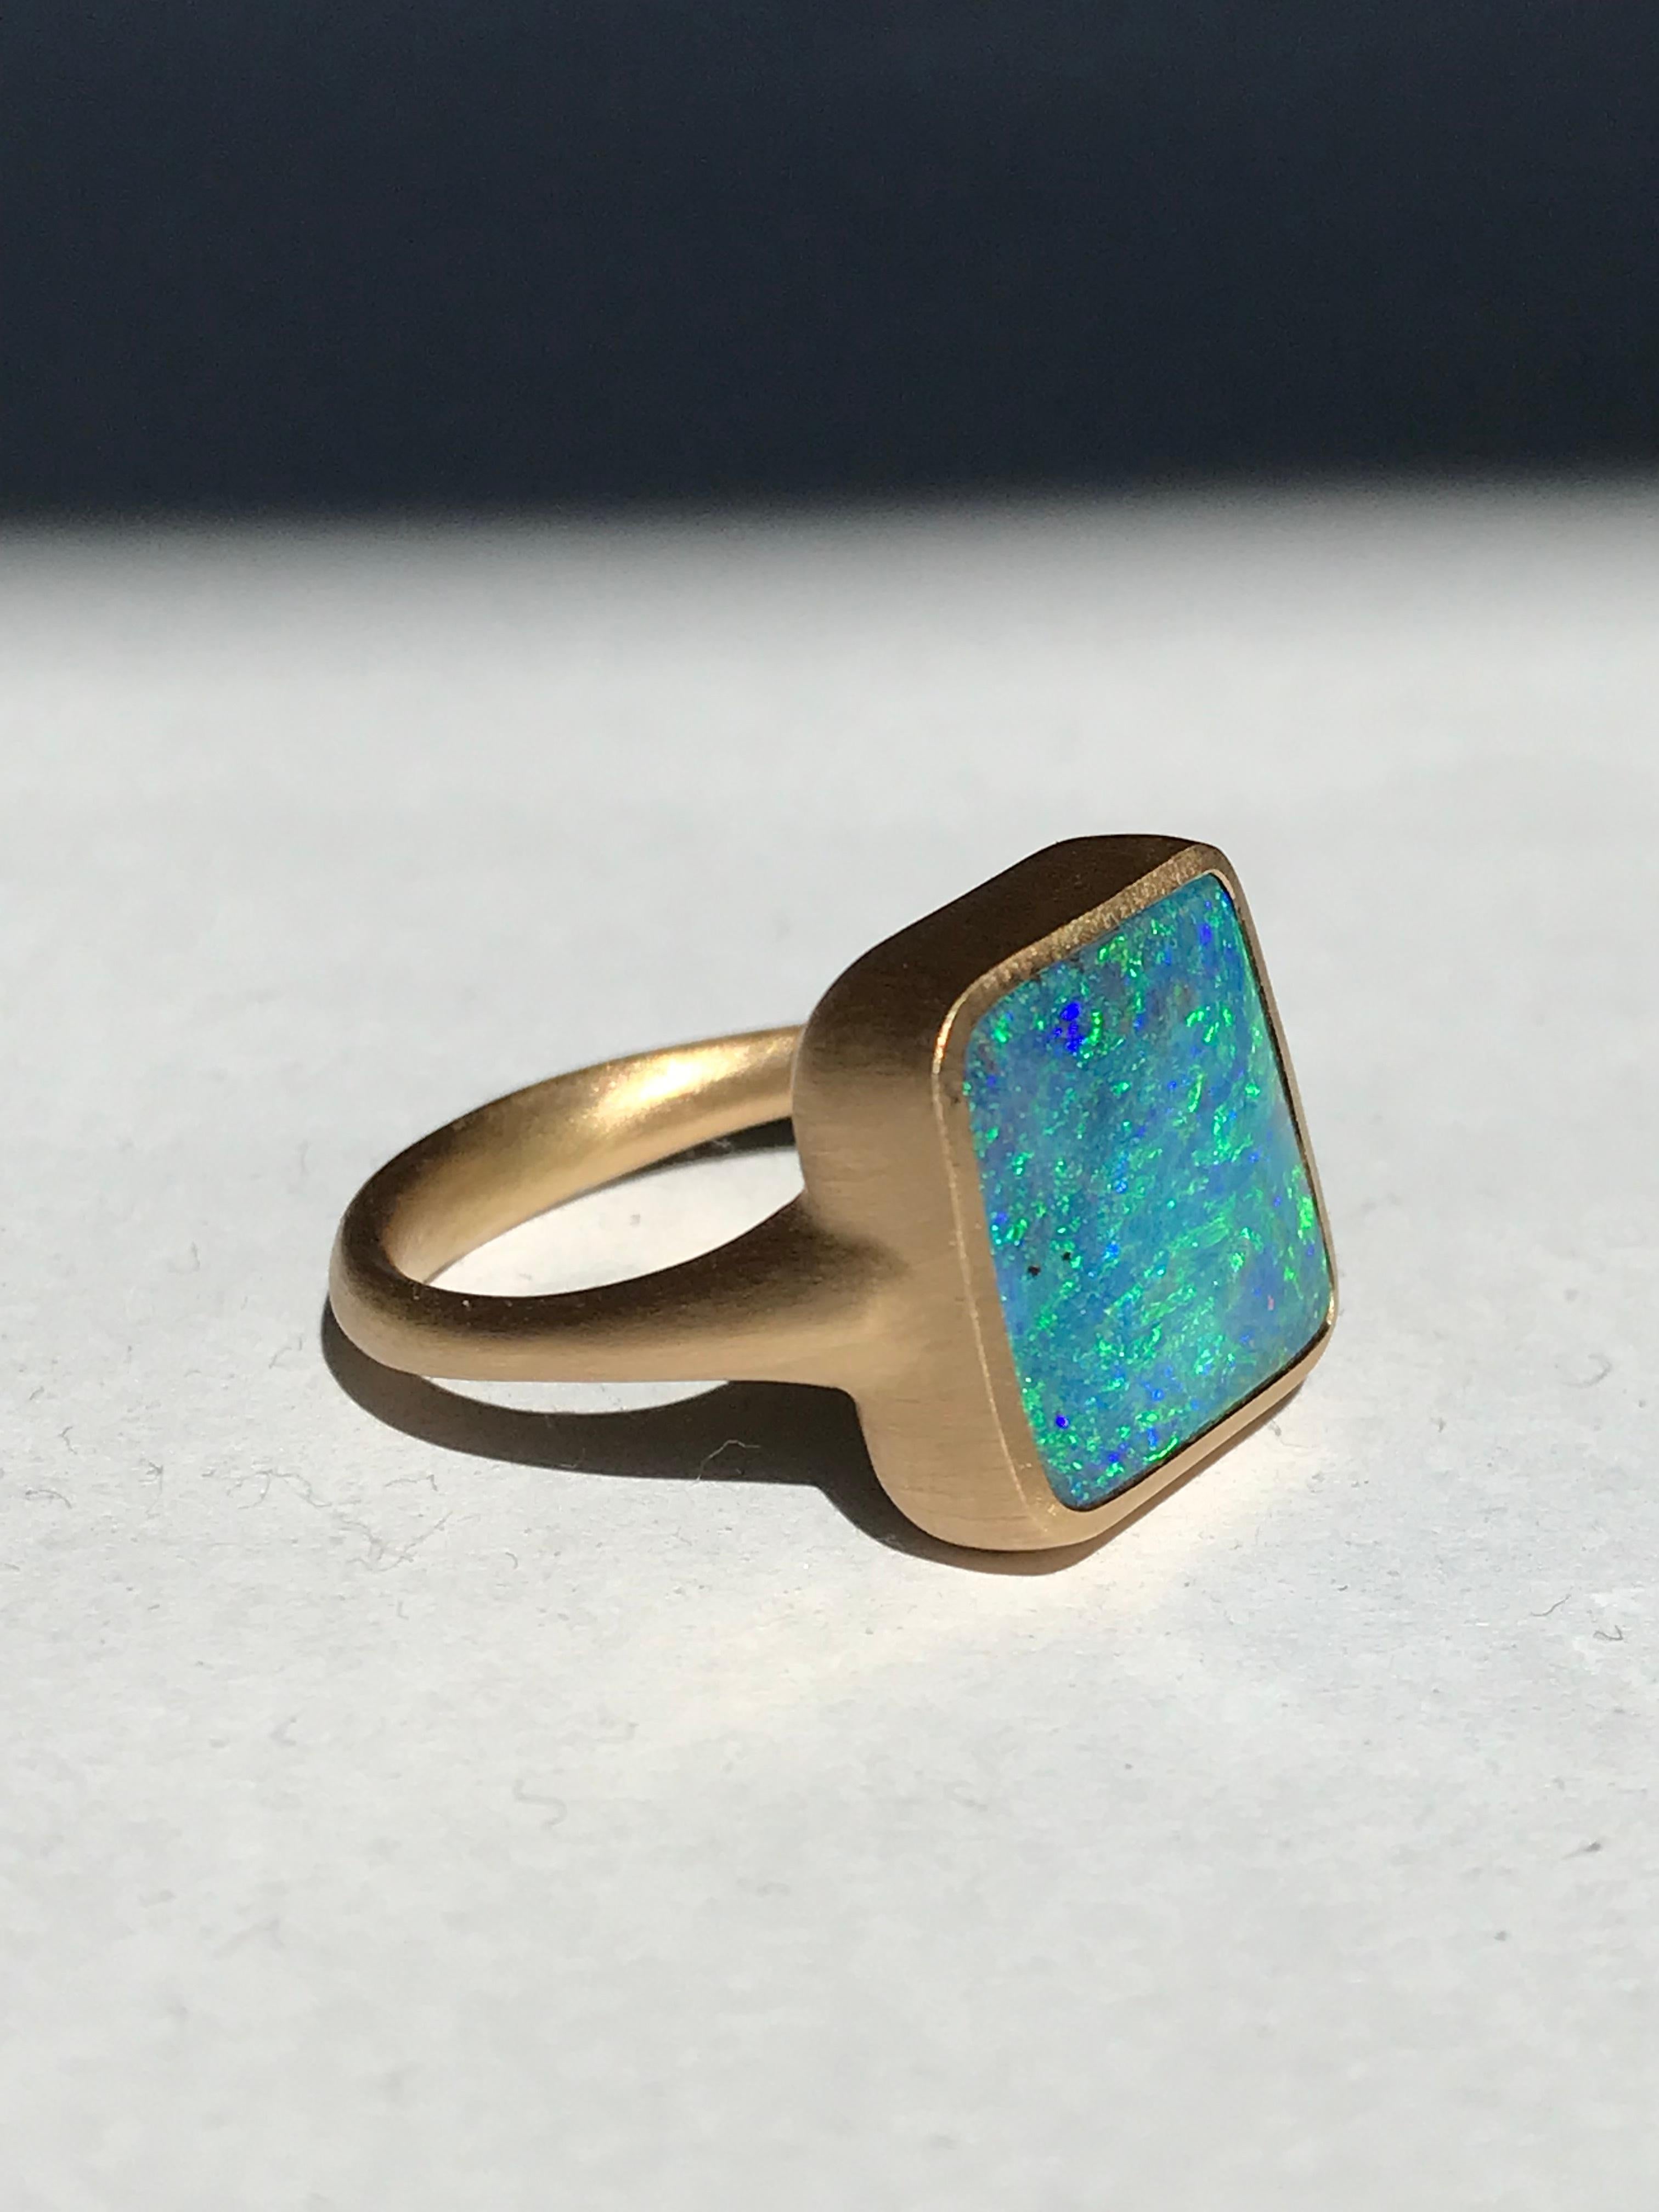 Dalben Blue Green Square Boulder Opal Yellow Gold Ring For Sale 6